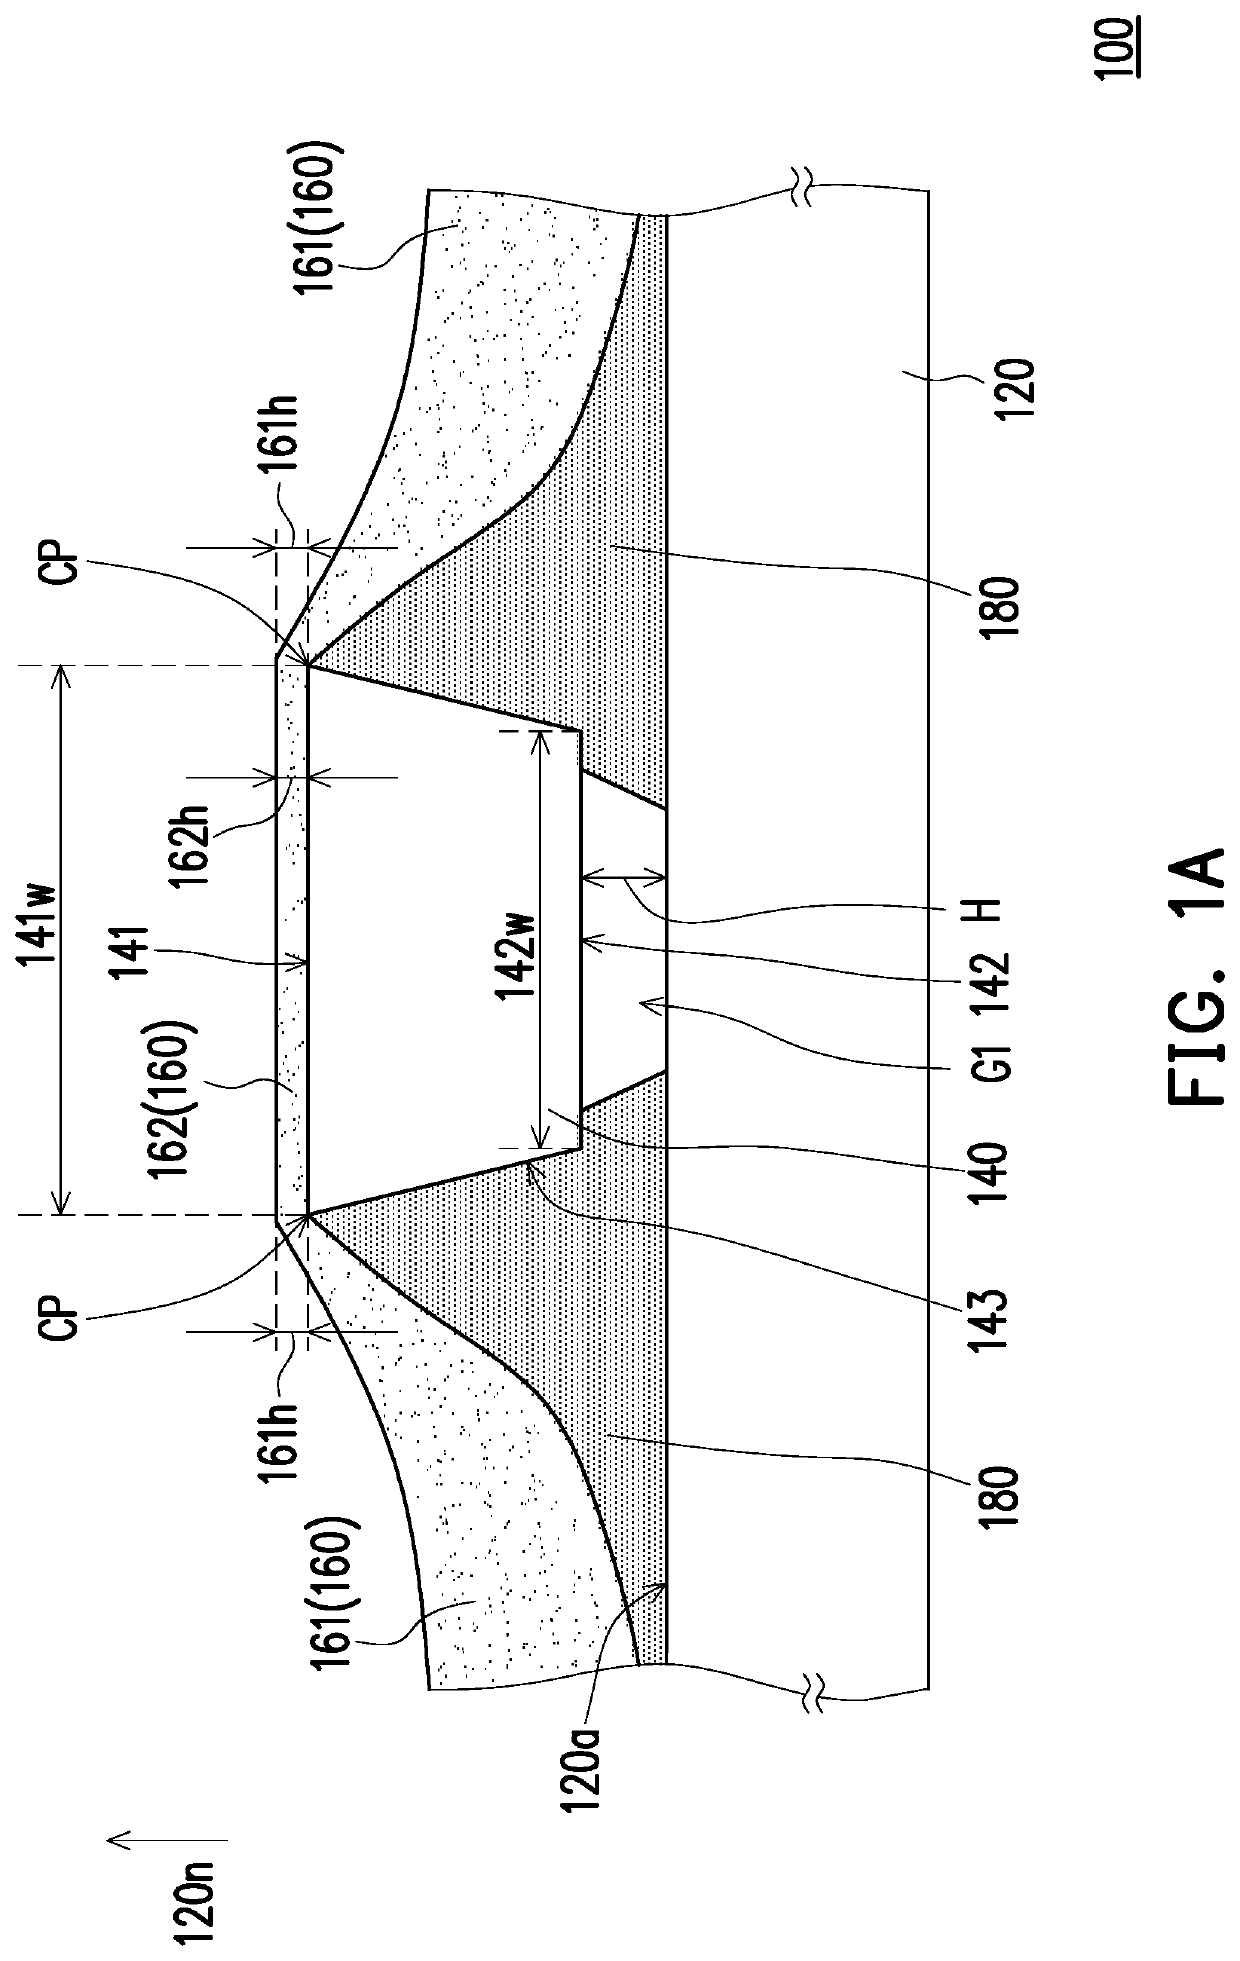 Structure with micro device having holding structure